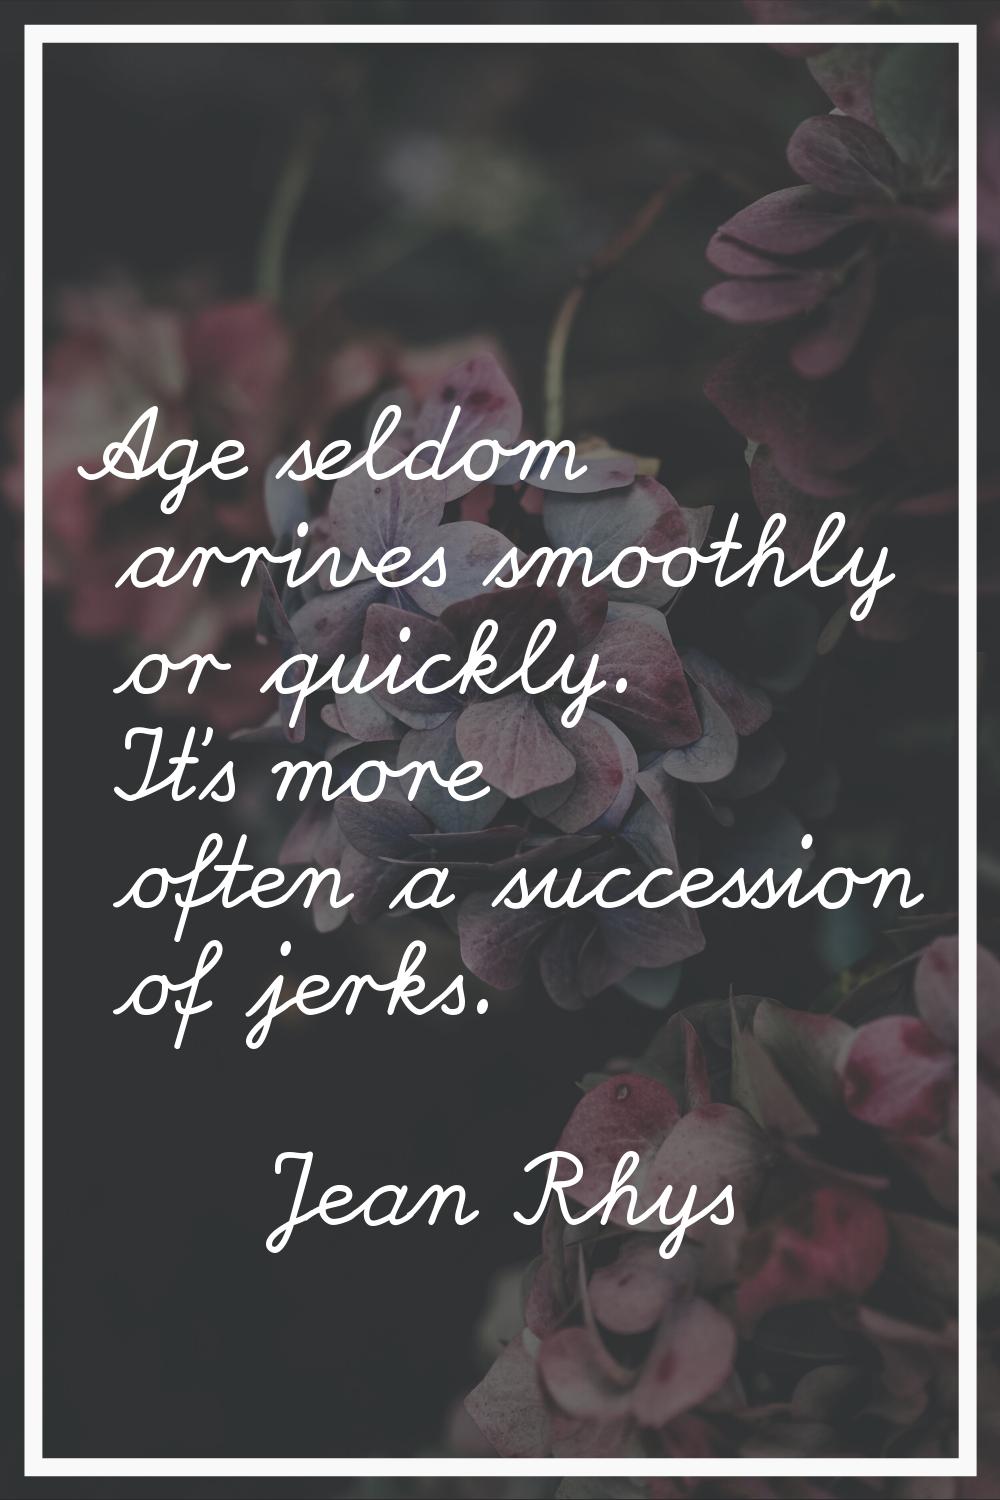 Age seldom arrives smoothly or quickly. It's more often a succession of jerks.